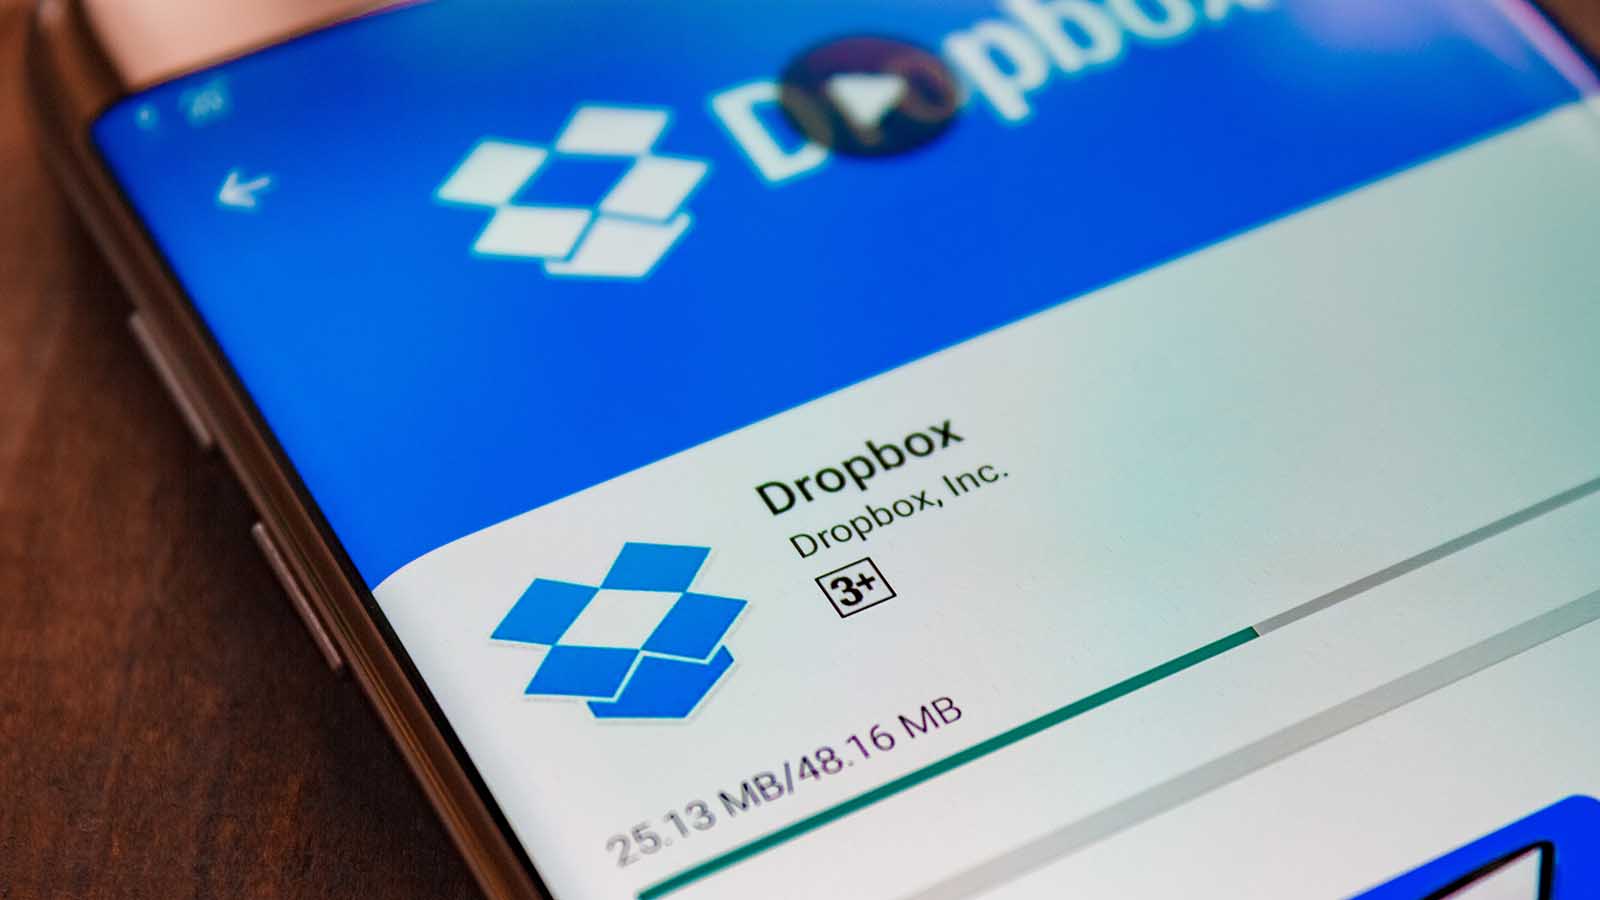 Dropbox 185.4.6054 instal the new version for iphone